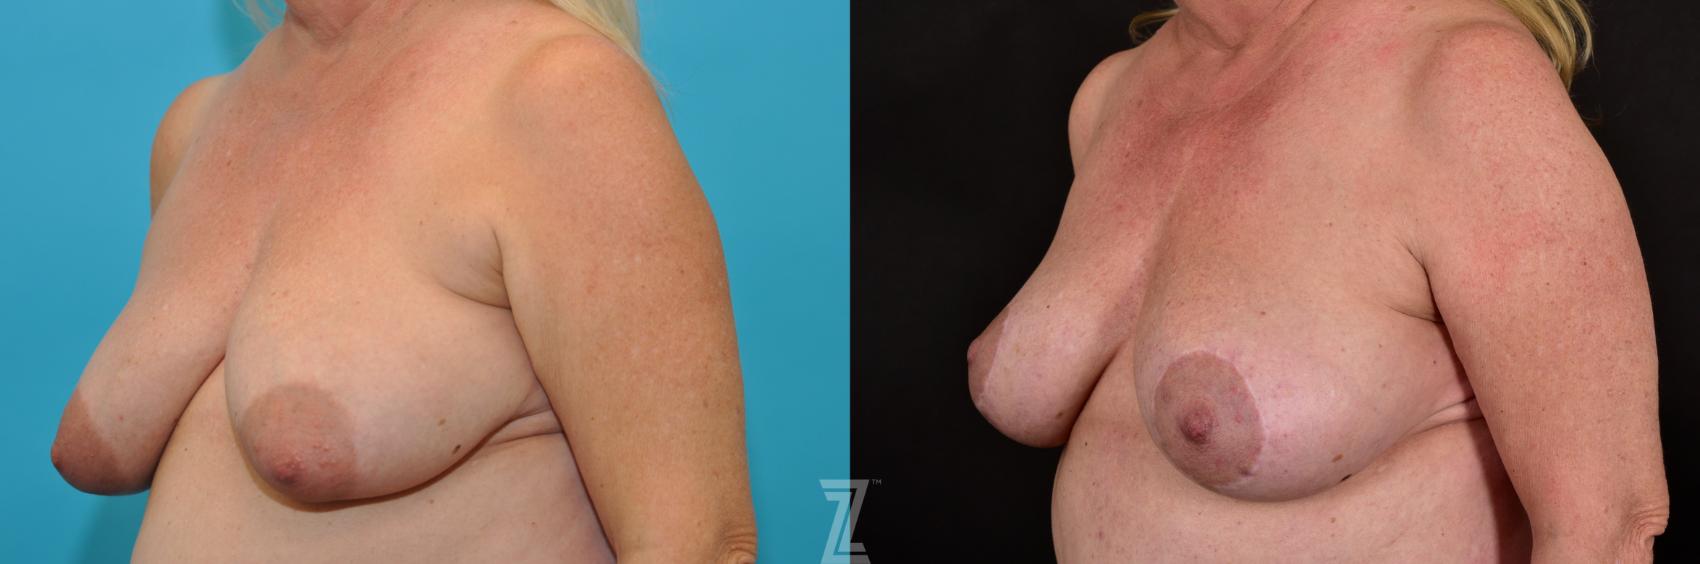 Breast Lift Before & After Photo | Austin, TX | The Piazza Center for Plastic Surgery & Advanced Skin Care